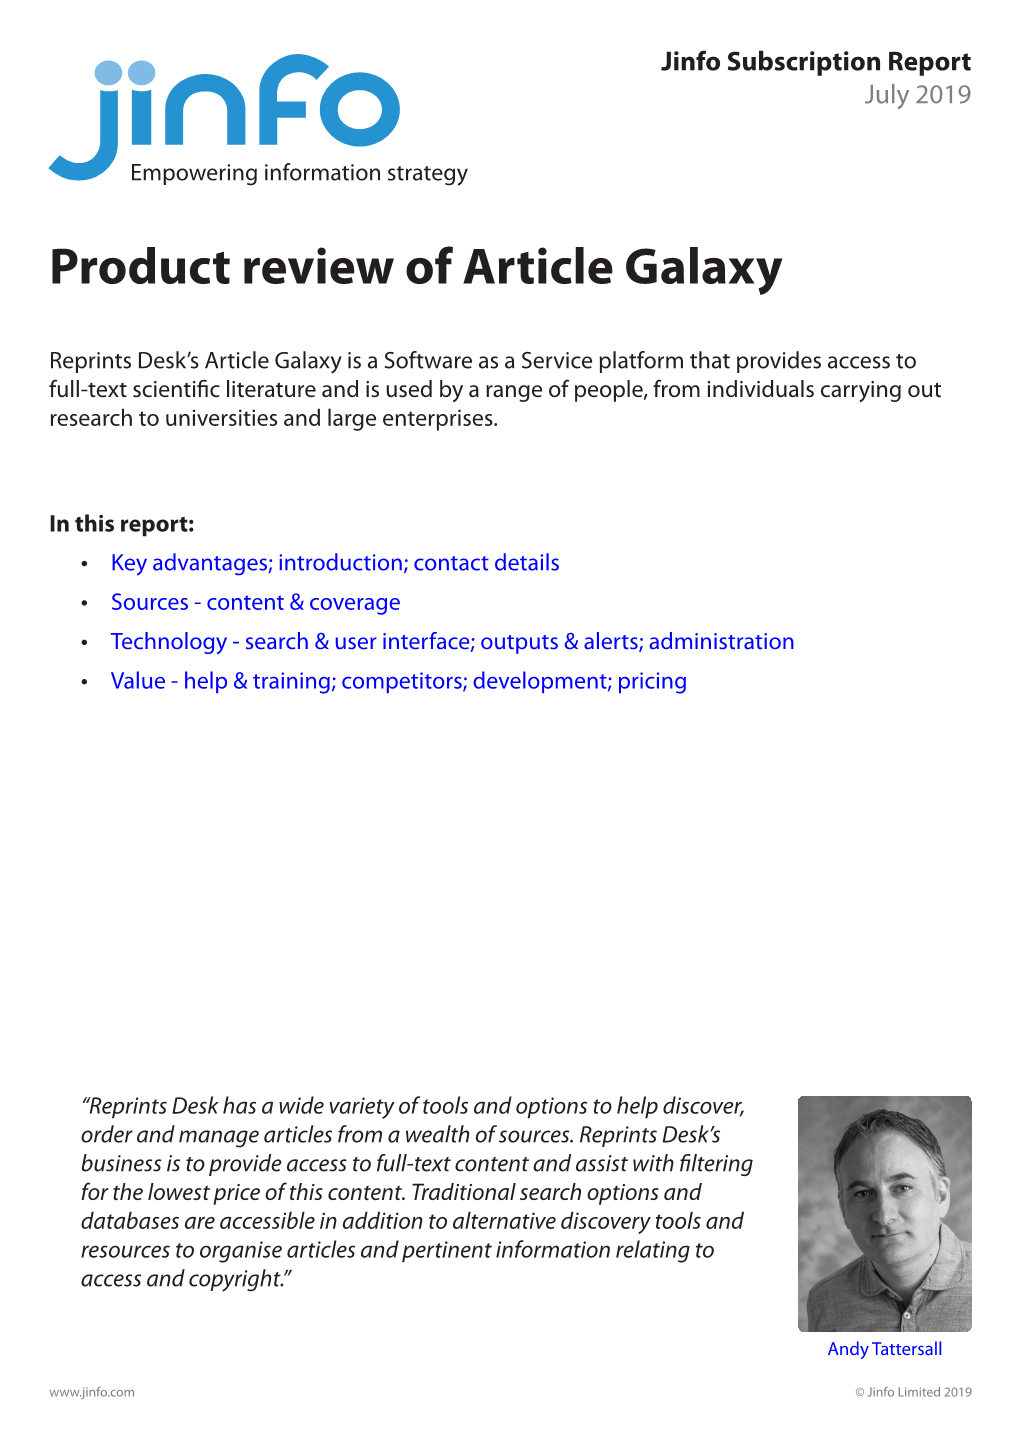 Product Review of Article Galaxy